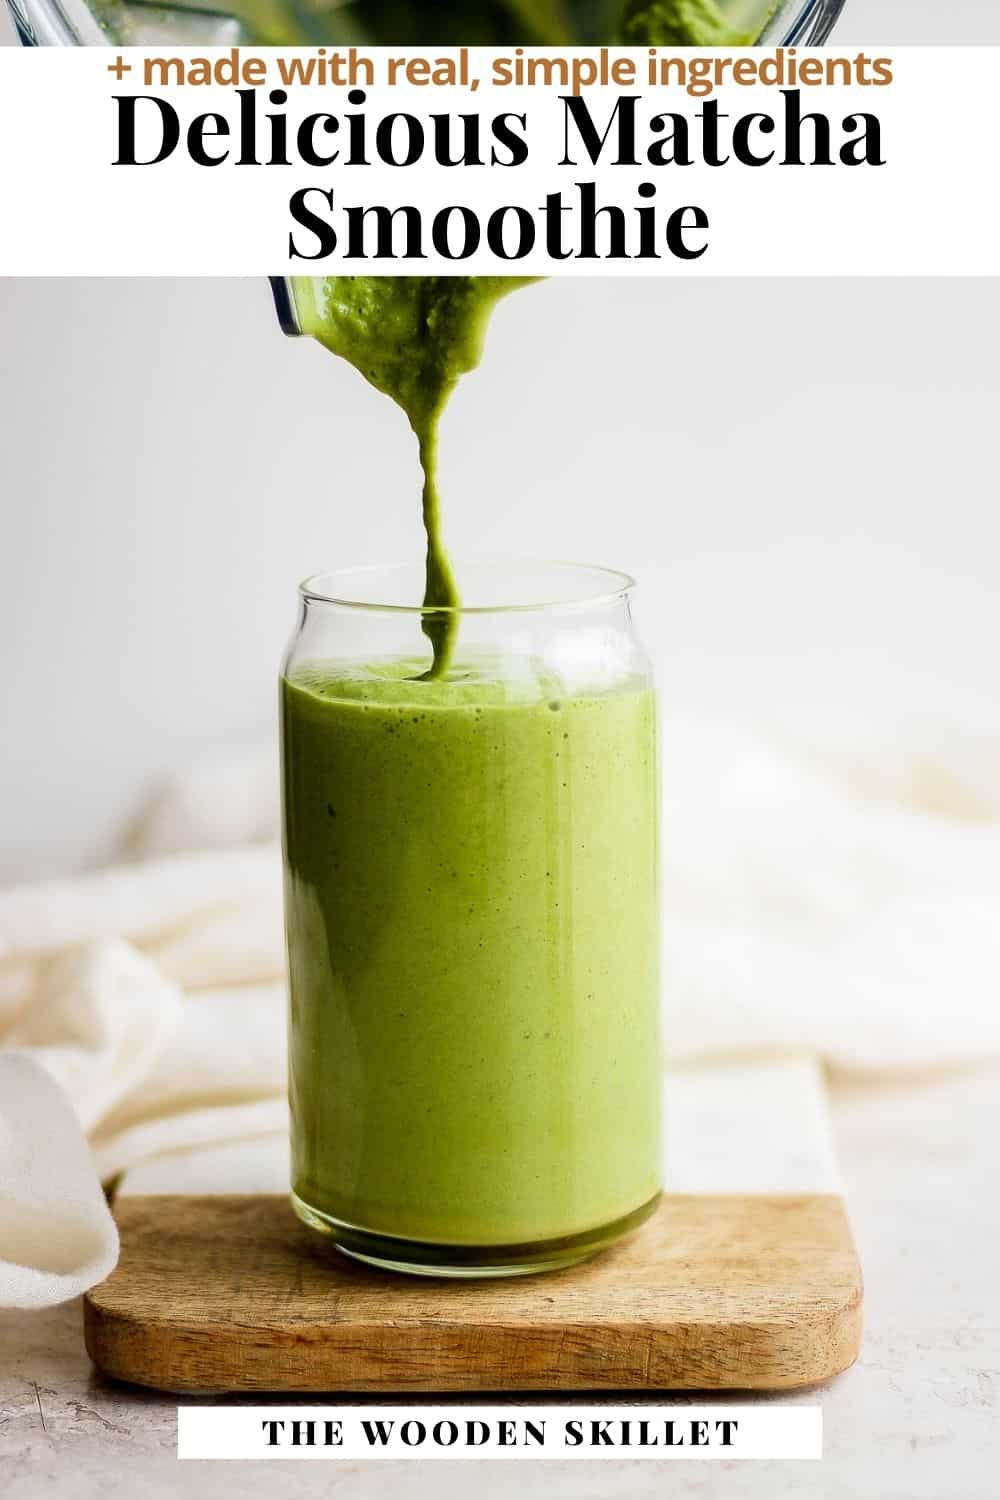 Pinterest image for a matcha smoothie.